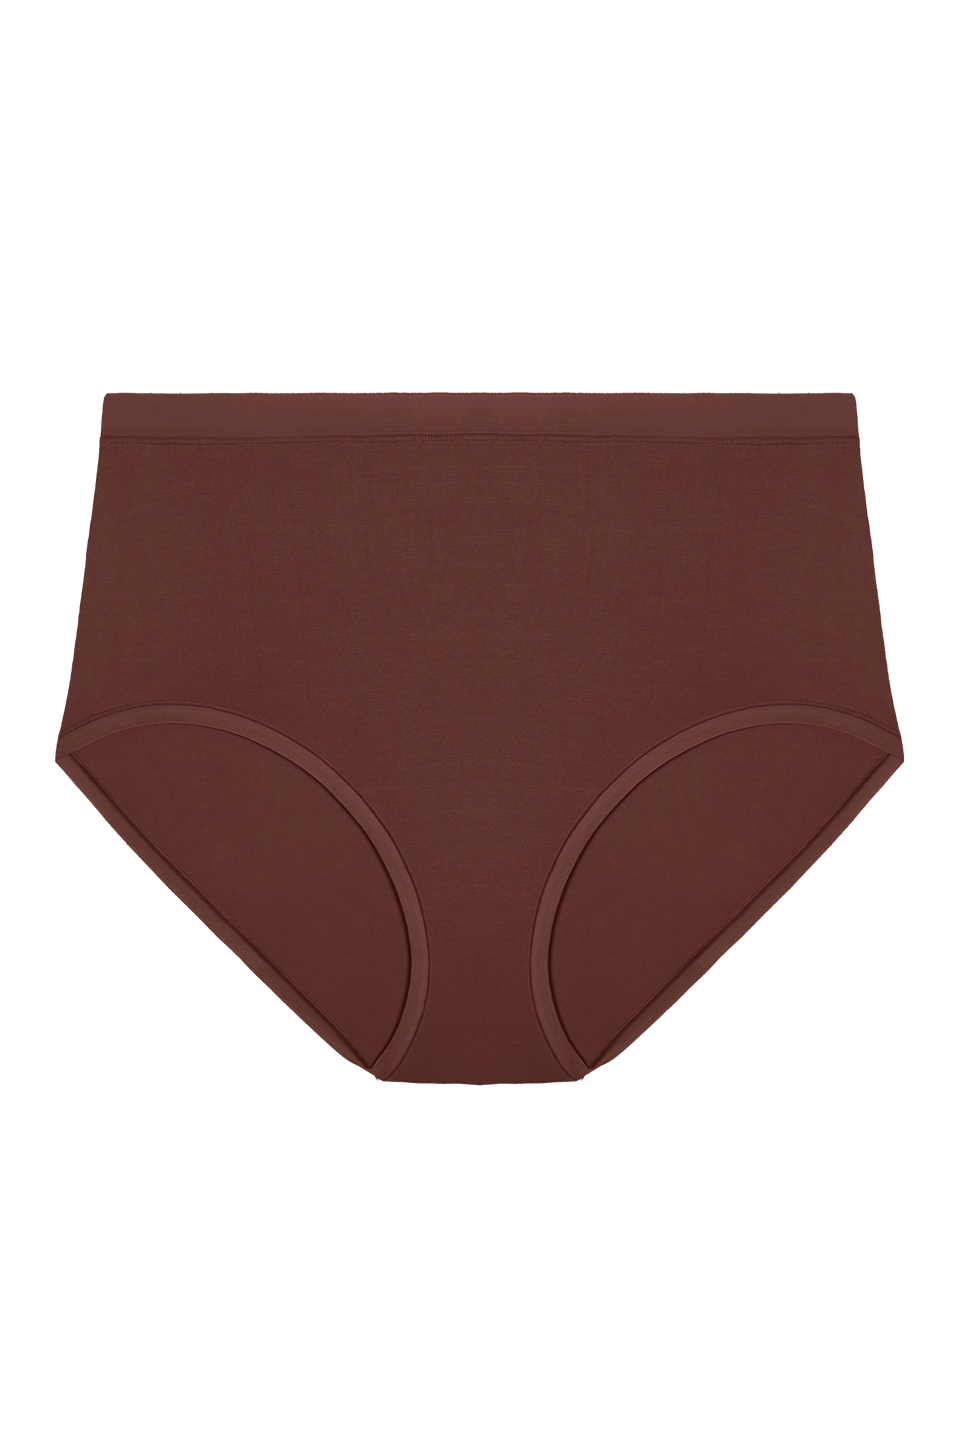 Buy COMFORT FULL BRIEF online at Intimo